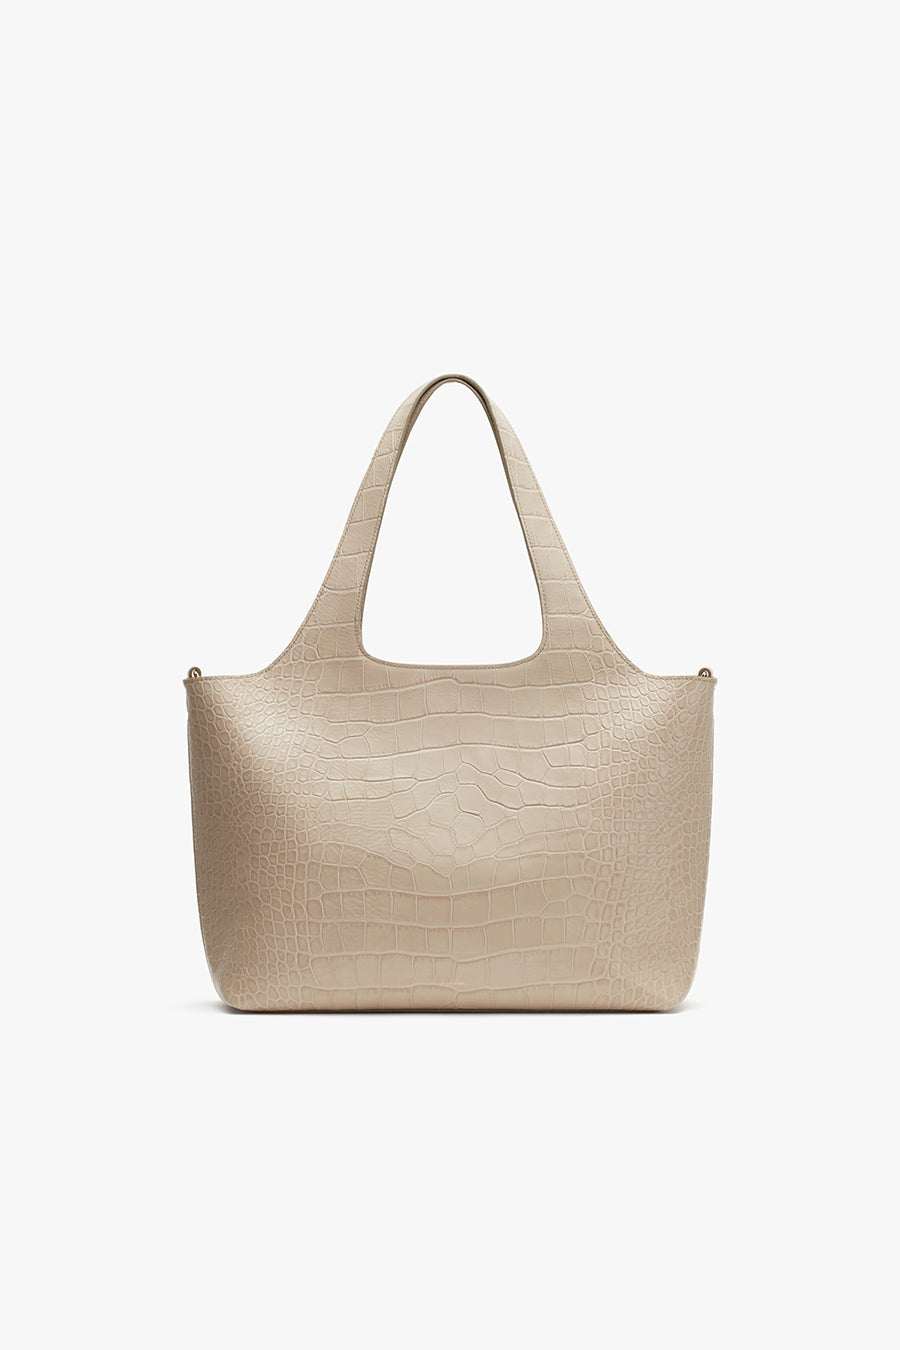 Bought the cuyana system tote for work : r/handbags